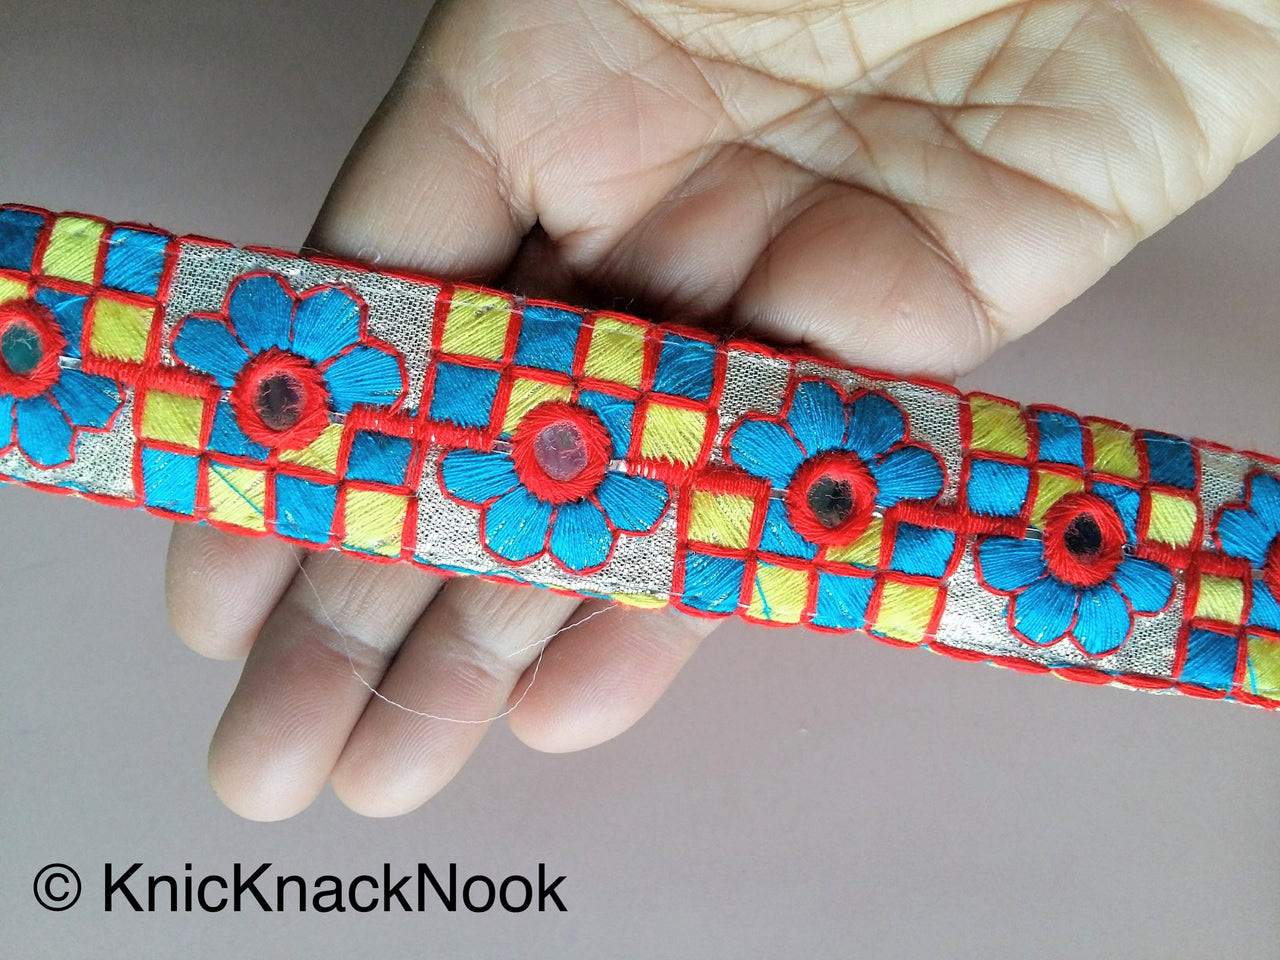 Gold Mirrored Fabric Trim With Blue, Yellow And Red Floral And Square Embroidery, Approx. 32mm Wide